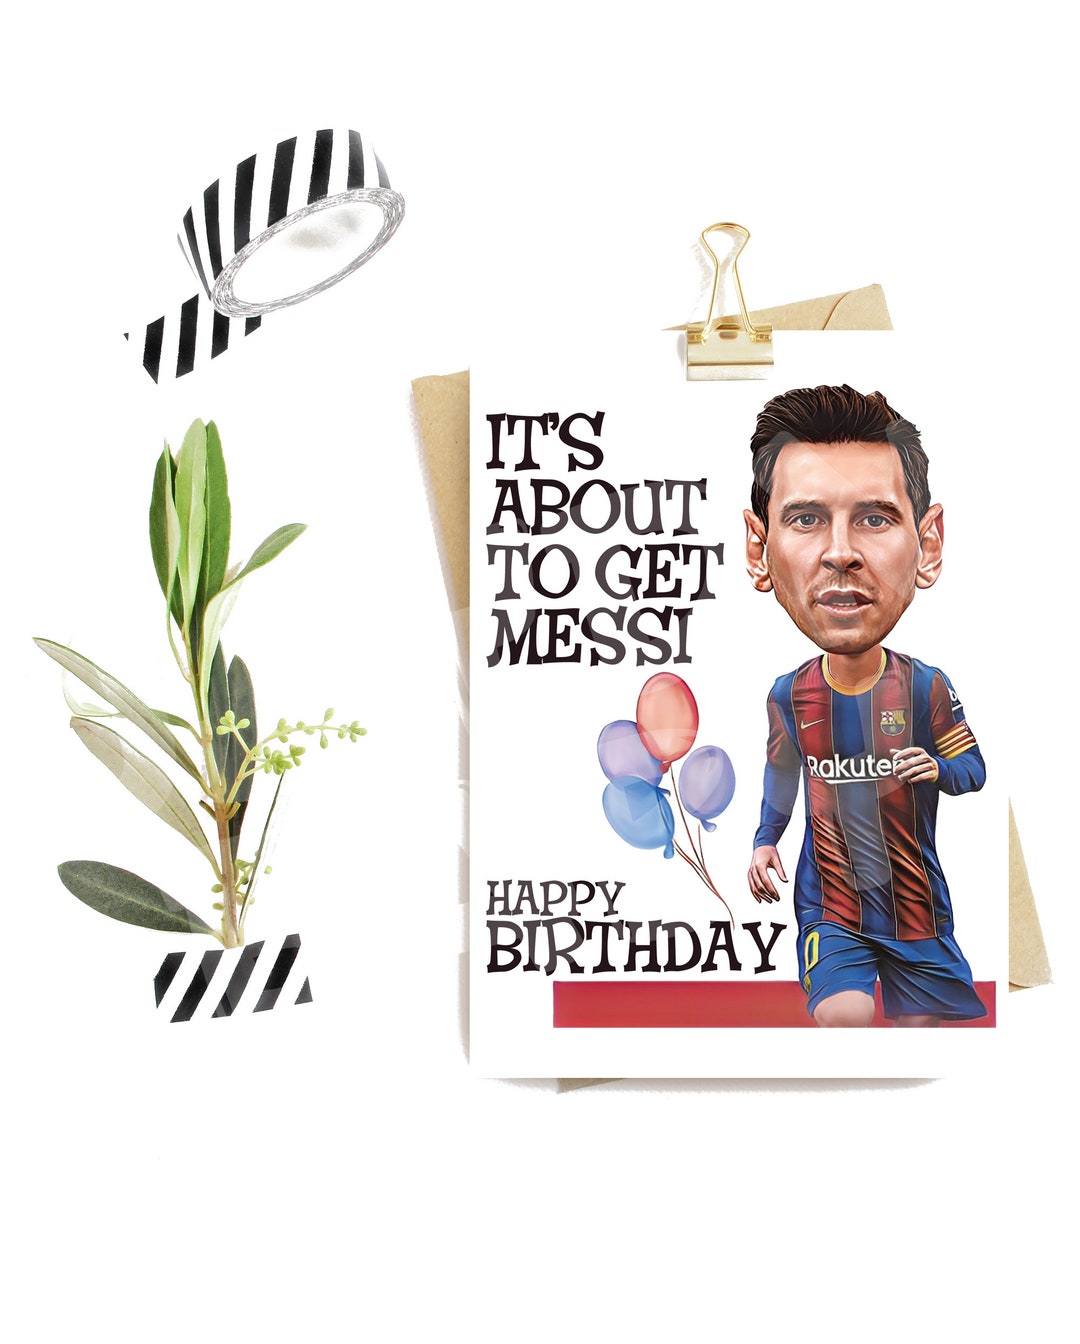 Funny Messi Birthday Card It's About to Get Messi - Etsy